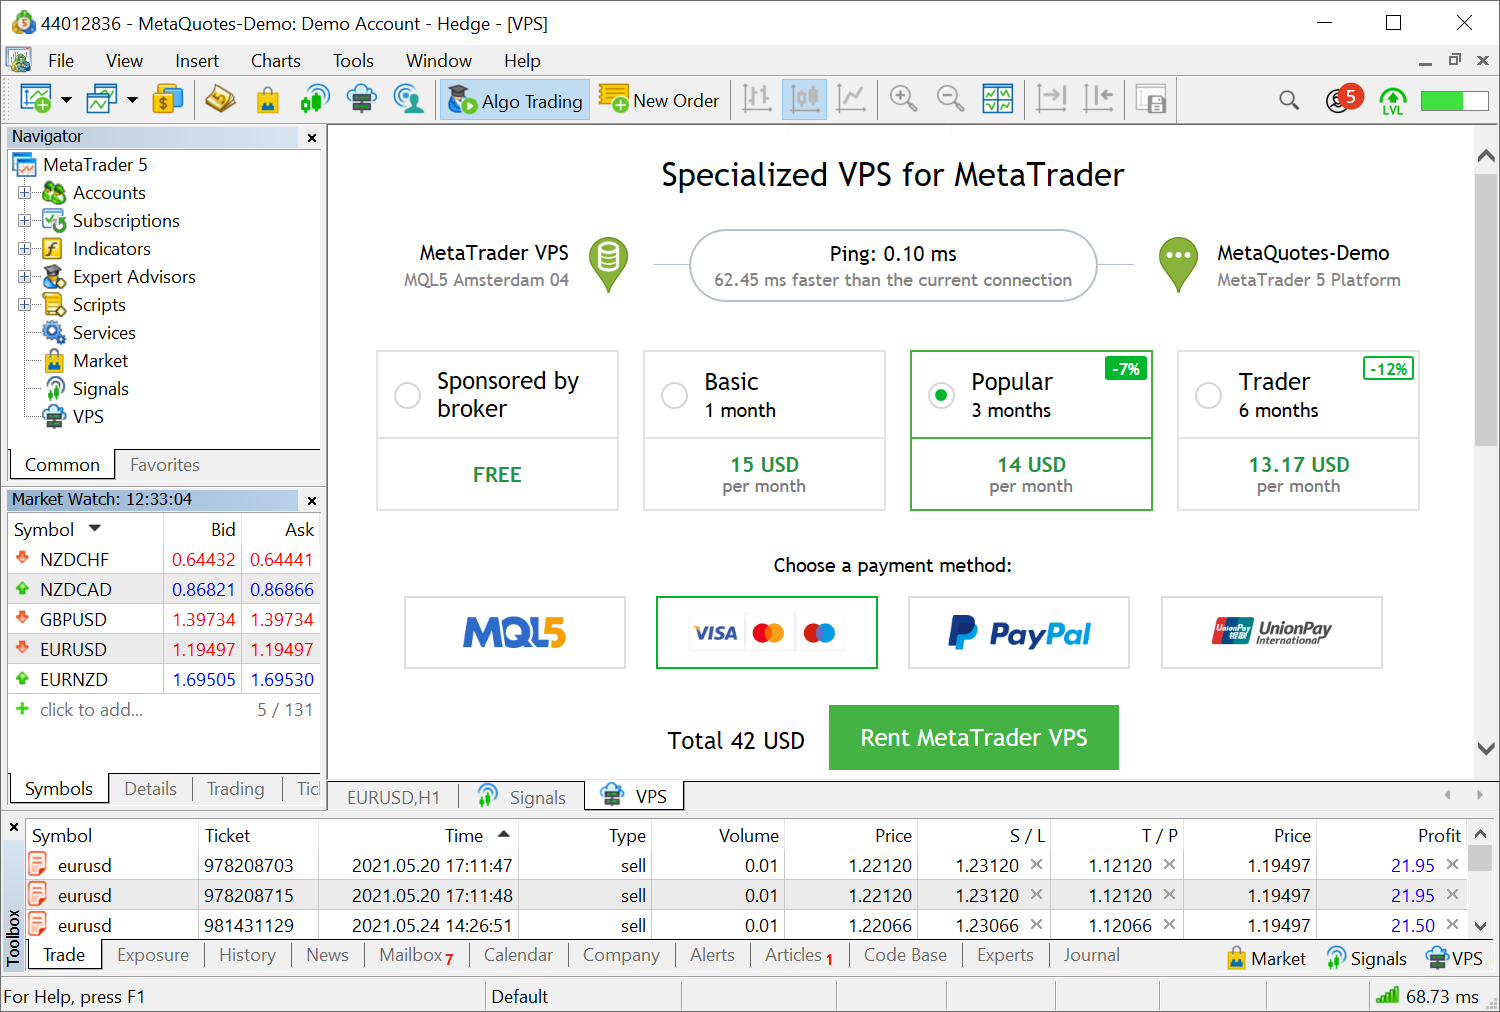 What's new in MetaTrader 5